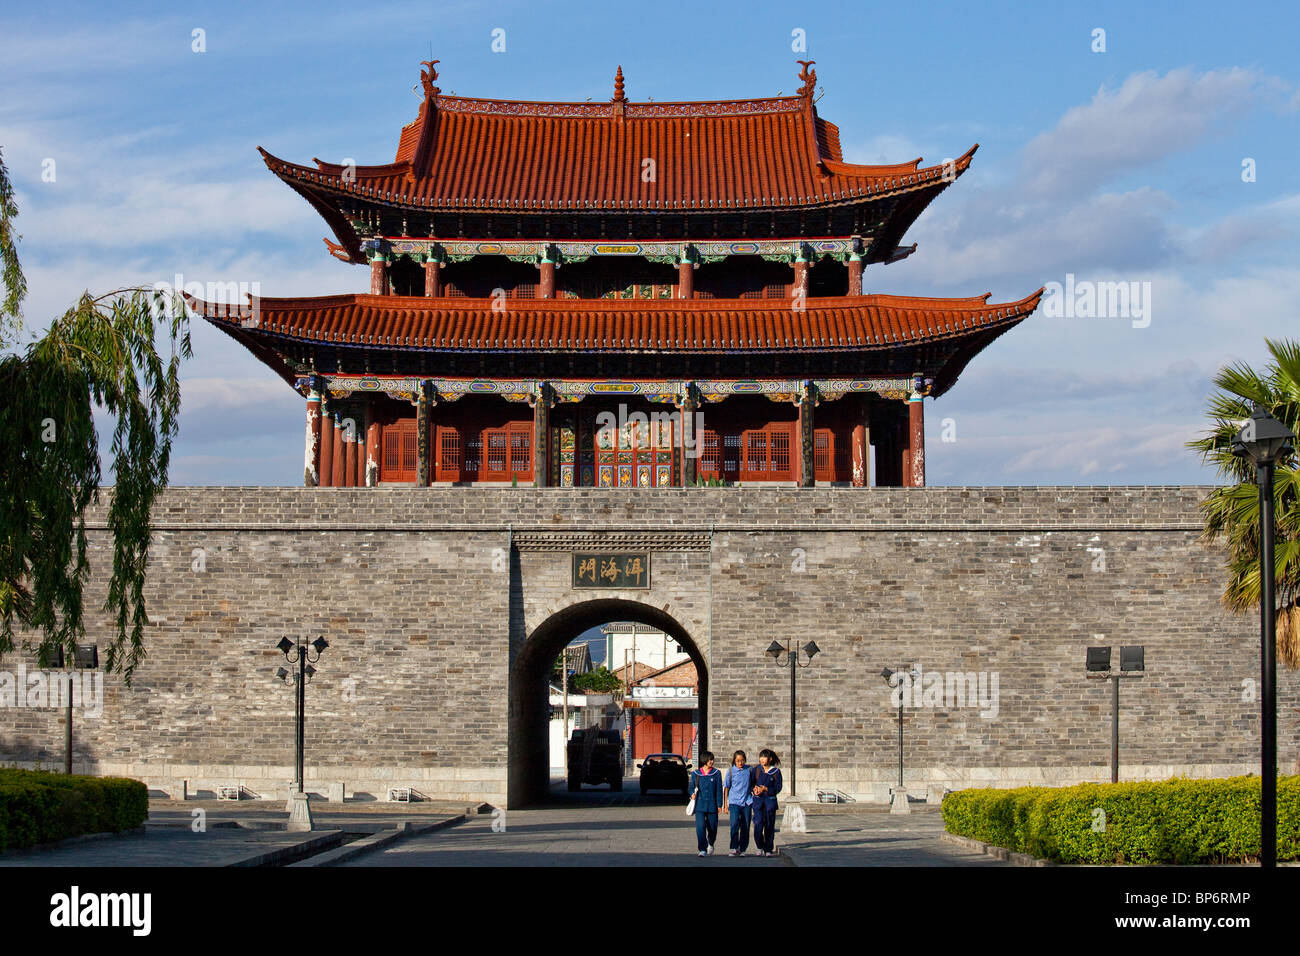 North Gate of the Old City Walls in Dali, China Stock Photo